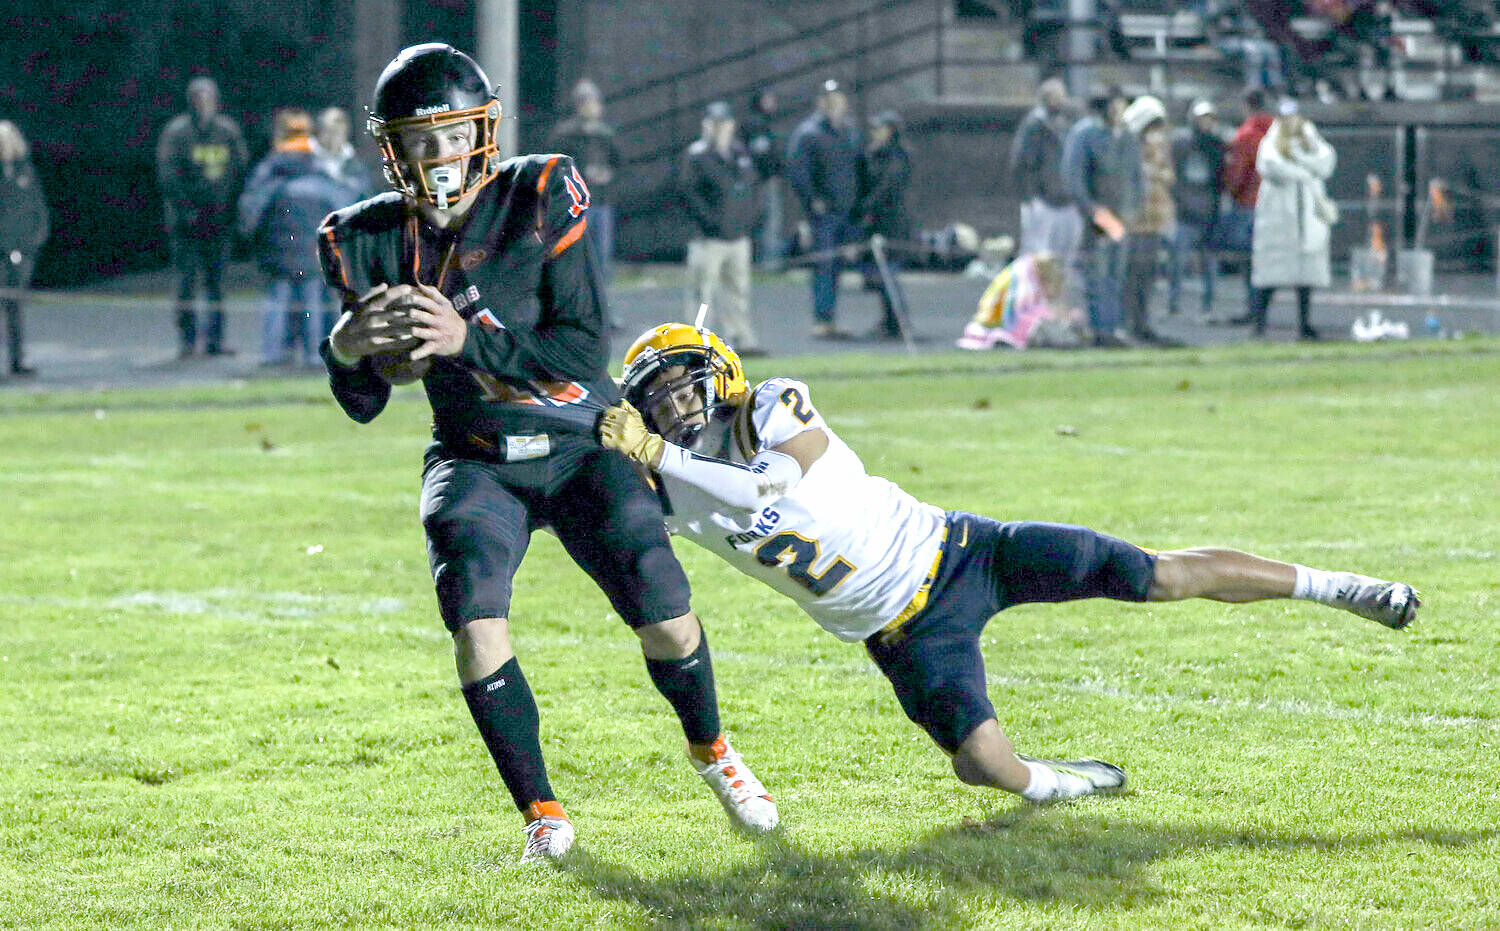 Kody Christen/The Chronicle 
Napavine’s Colin Shields hauls in a touchdown catch while Forks’ Noah Foster defends during Napavine’s 52-8 win over Forks on Thursday.